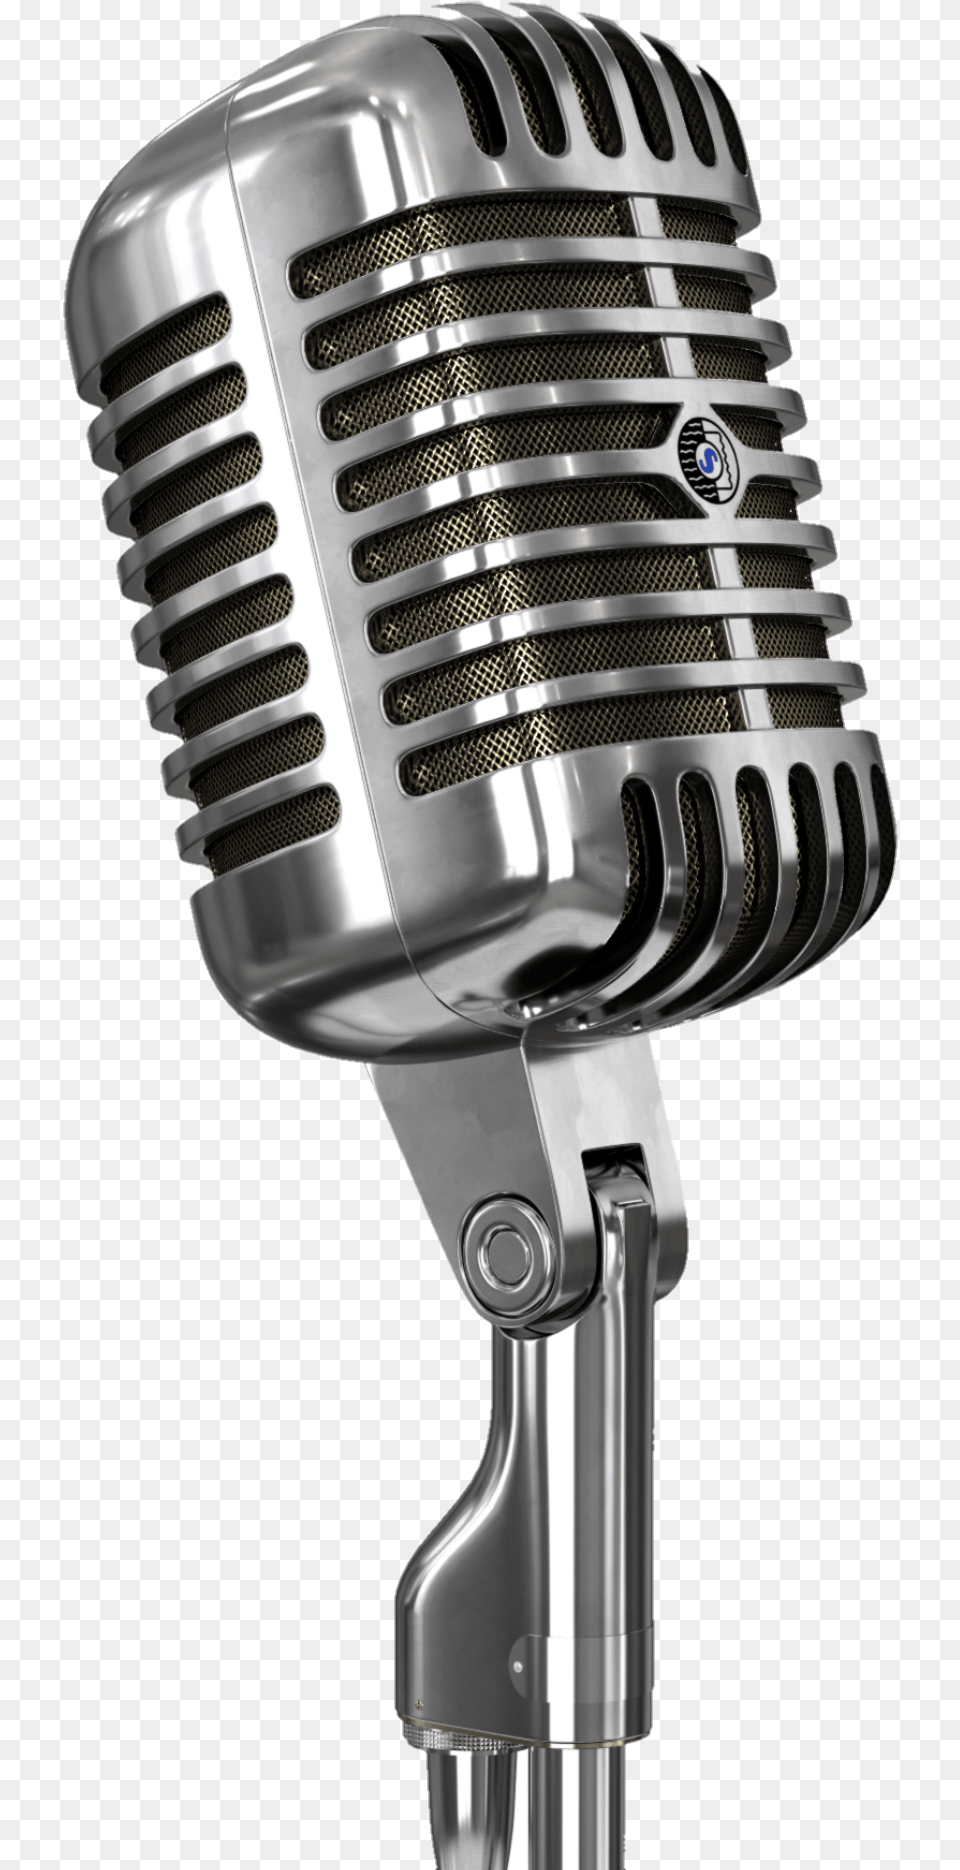 Vintage Microphone And Stand Microphone Transparent, Electrical Device Free Png Download